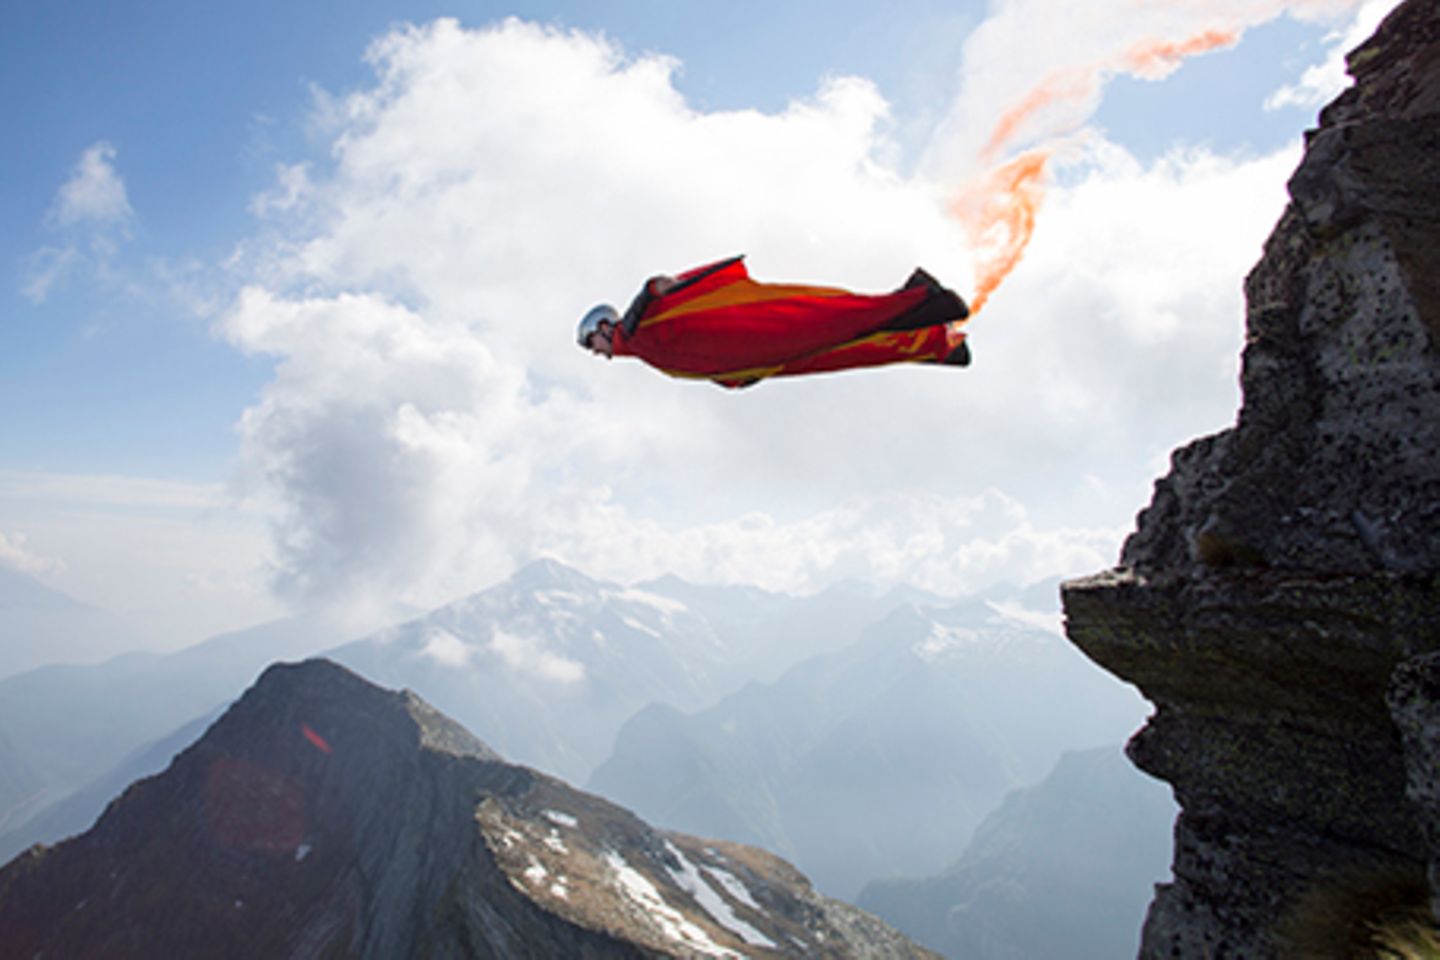 Wingsuit Jumper jumps from rocks with red beacon.